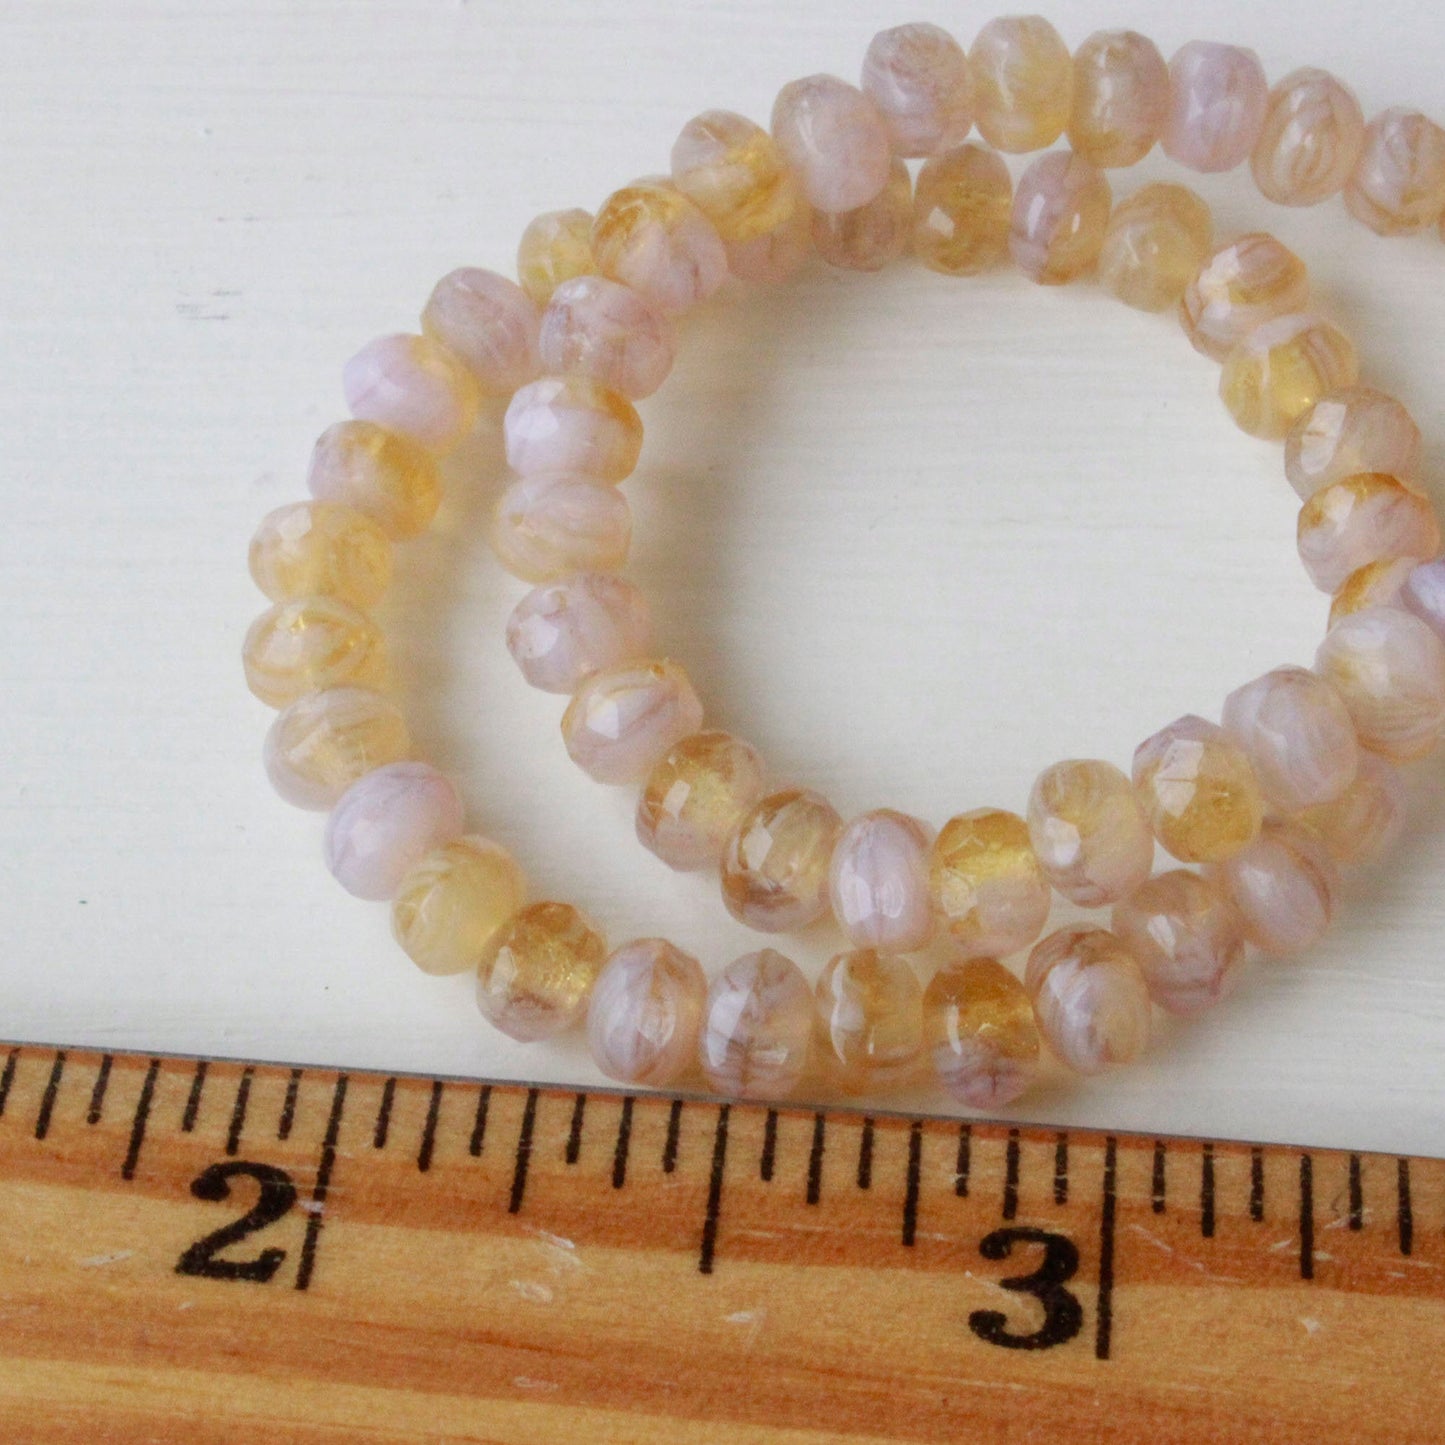 3x5mm Rondelle Beads - Pink Amber Mix - 25 Beads